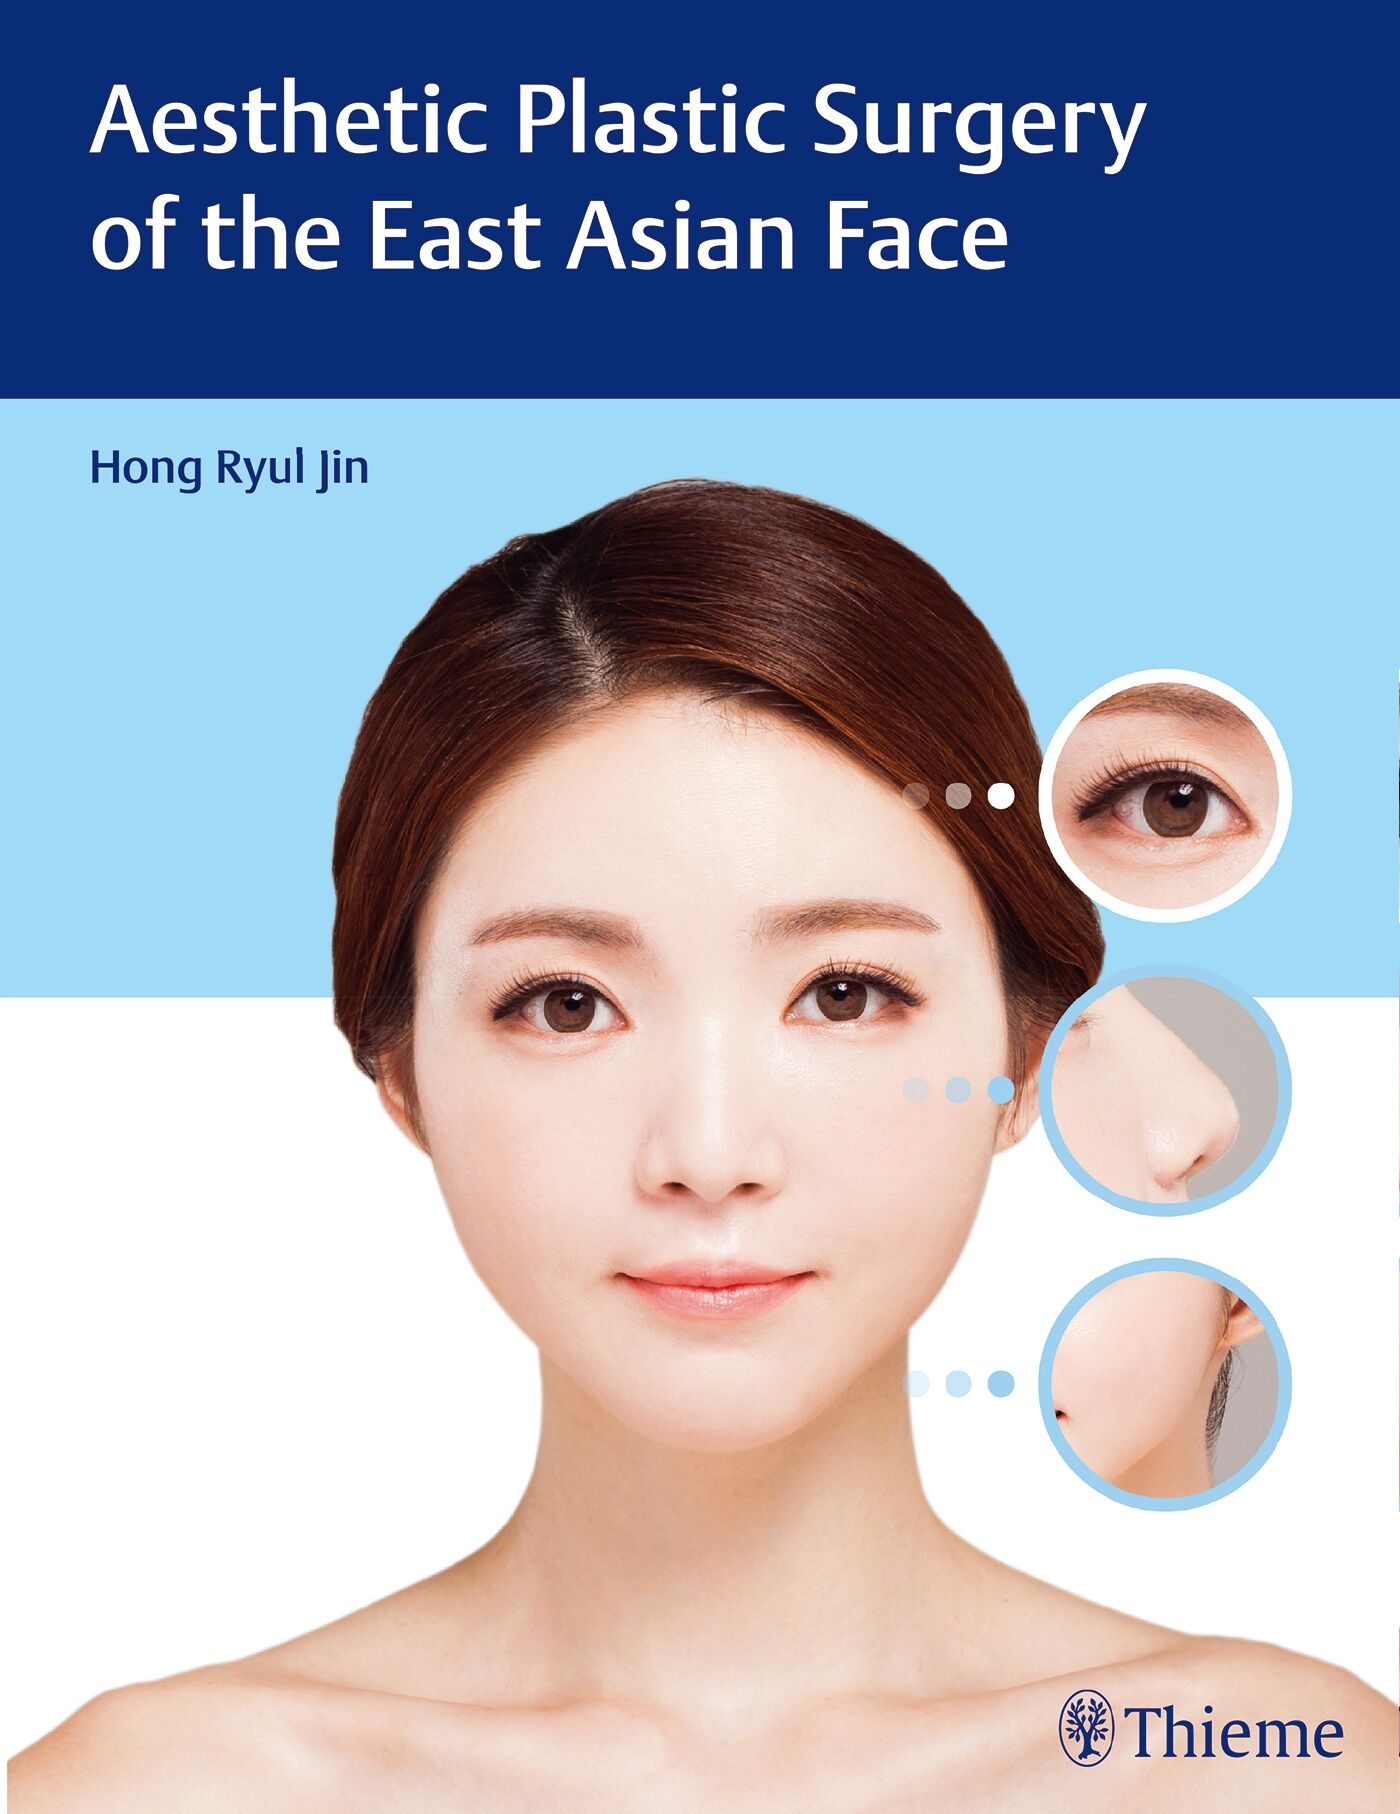 Aesthetic Plastic Surgery of the East Asian Face, 9781626231436